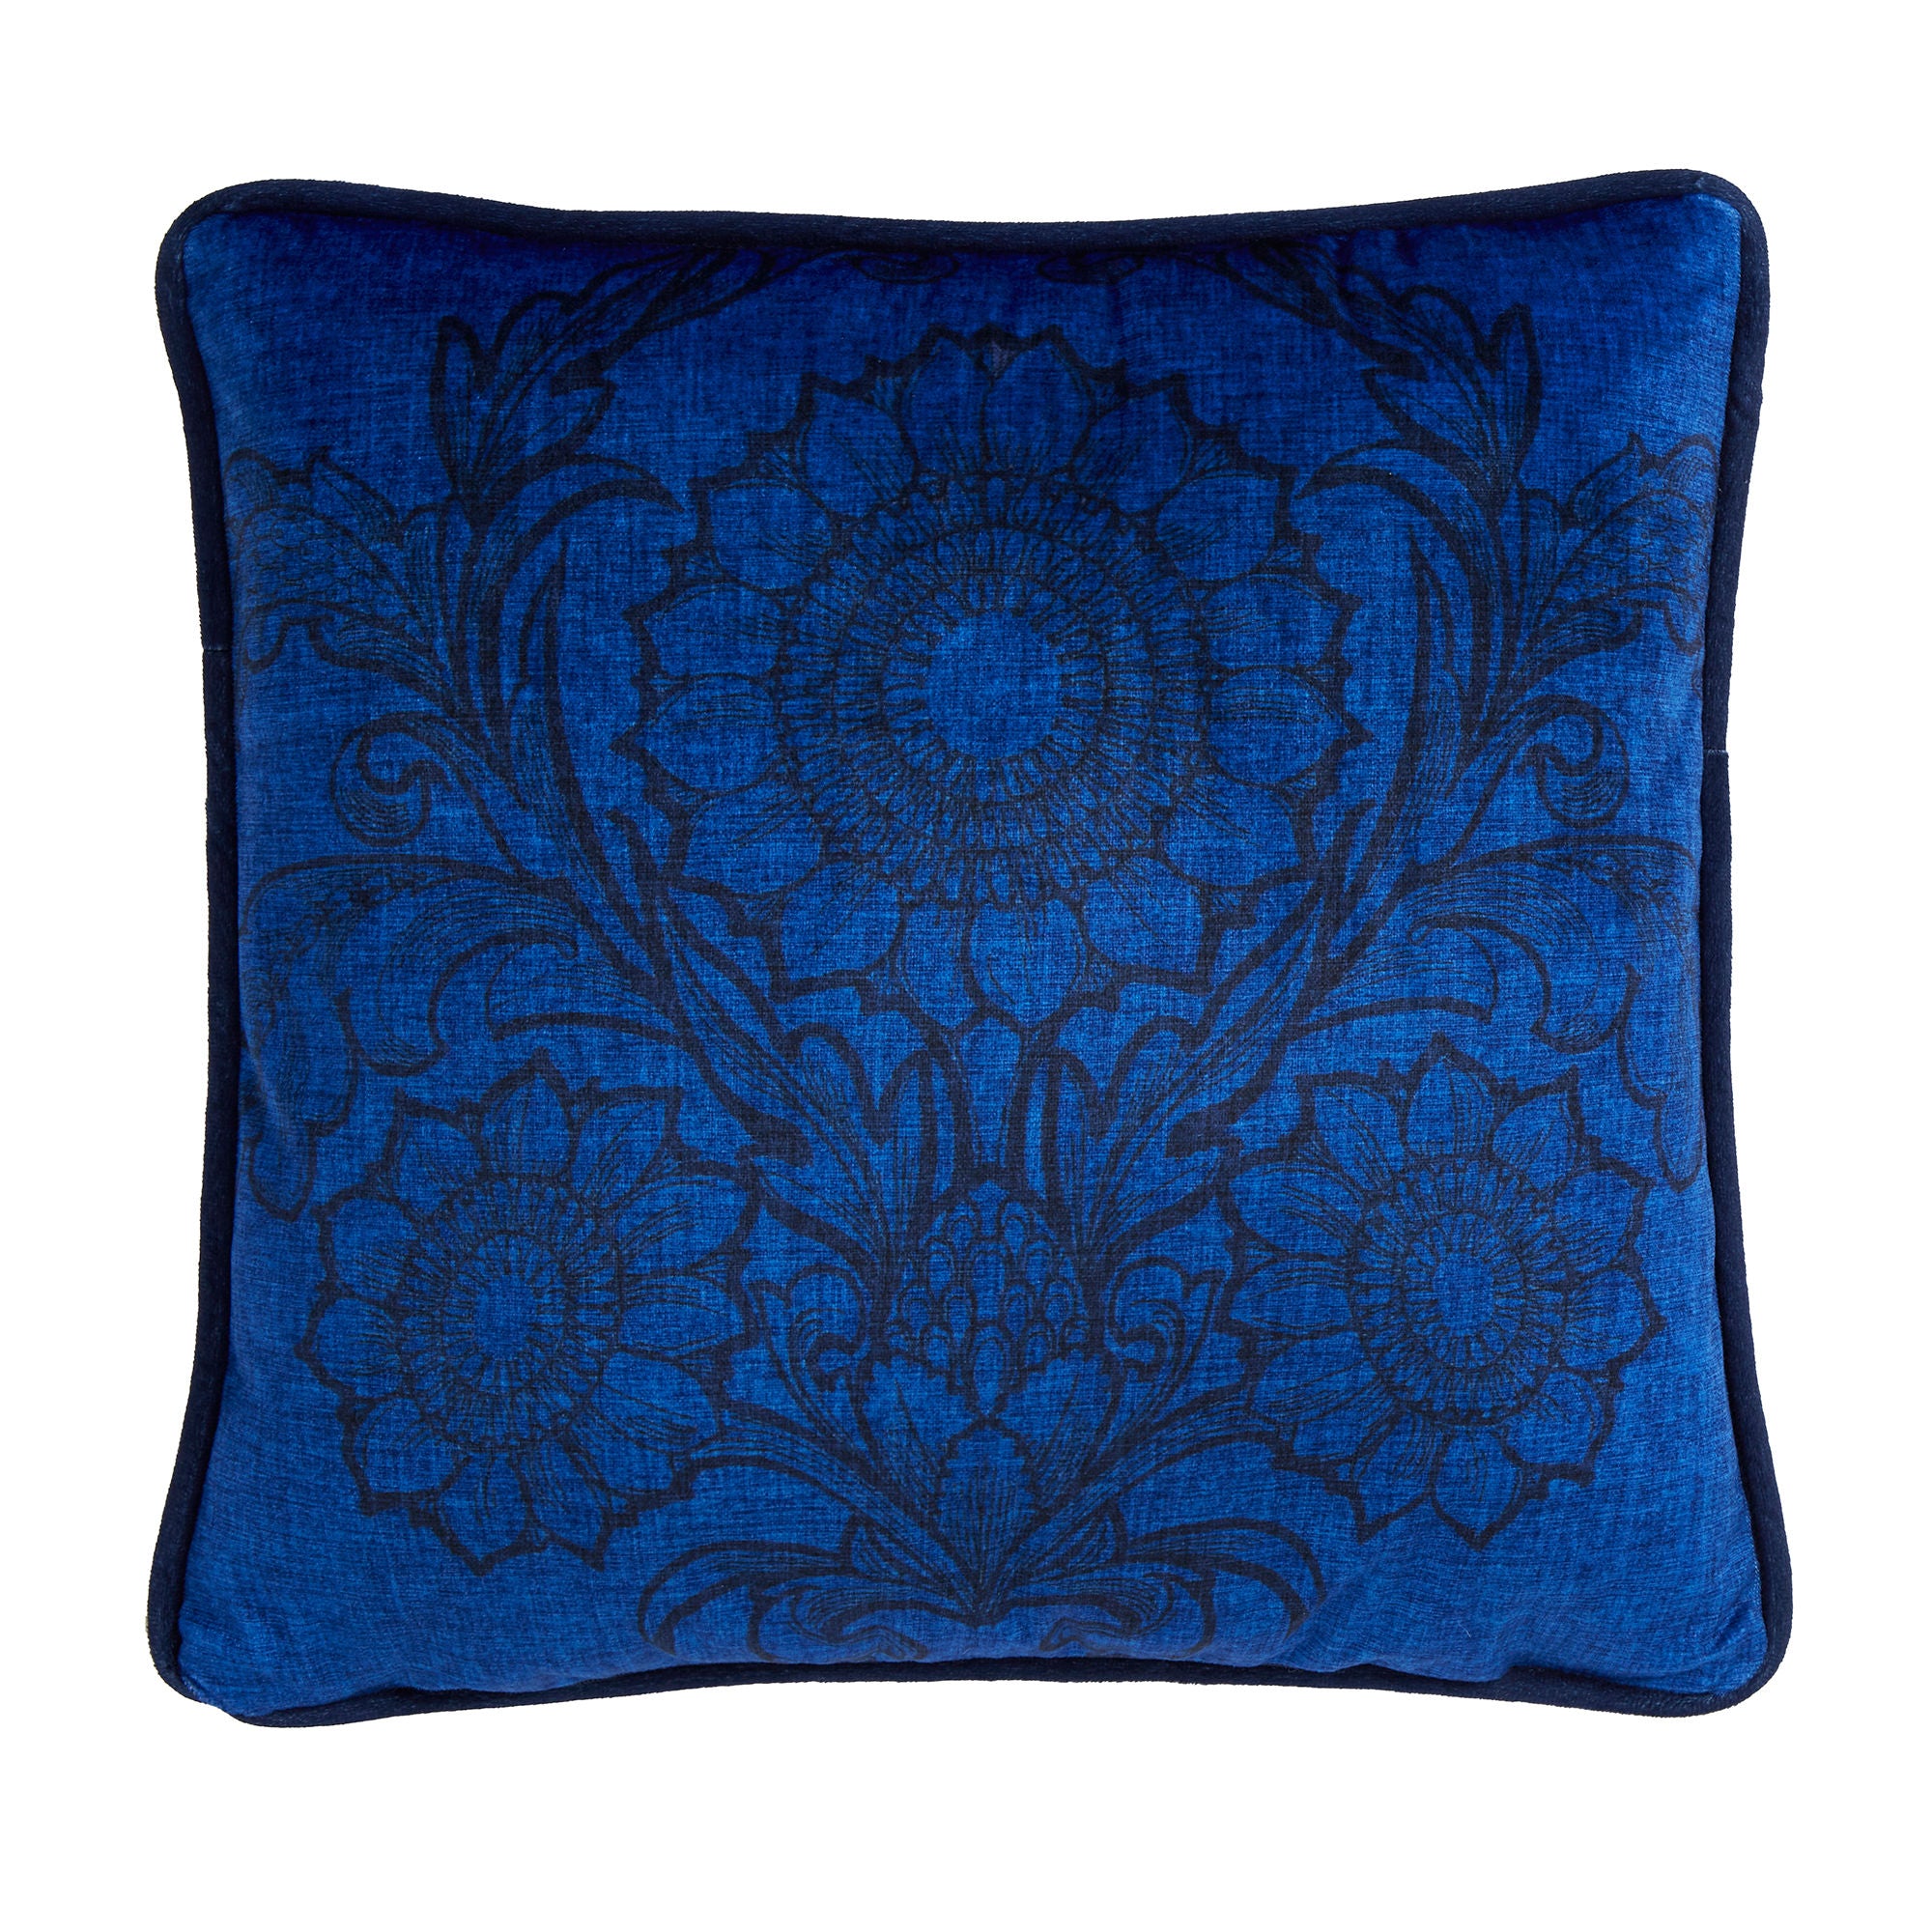 Romilly Cushion by Laurence Llewelyn-Bowen in Blue 43 x 43cm - Cushion - Laurence Llewelyn-Bowen